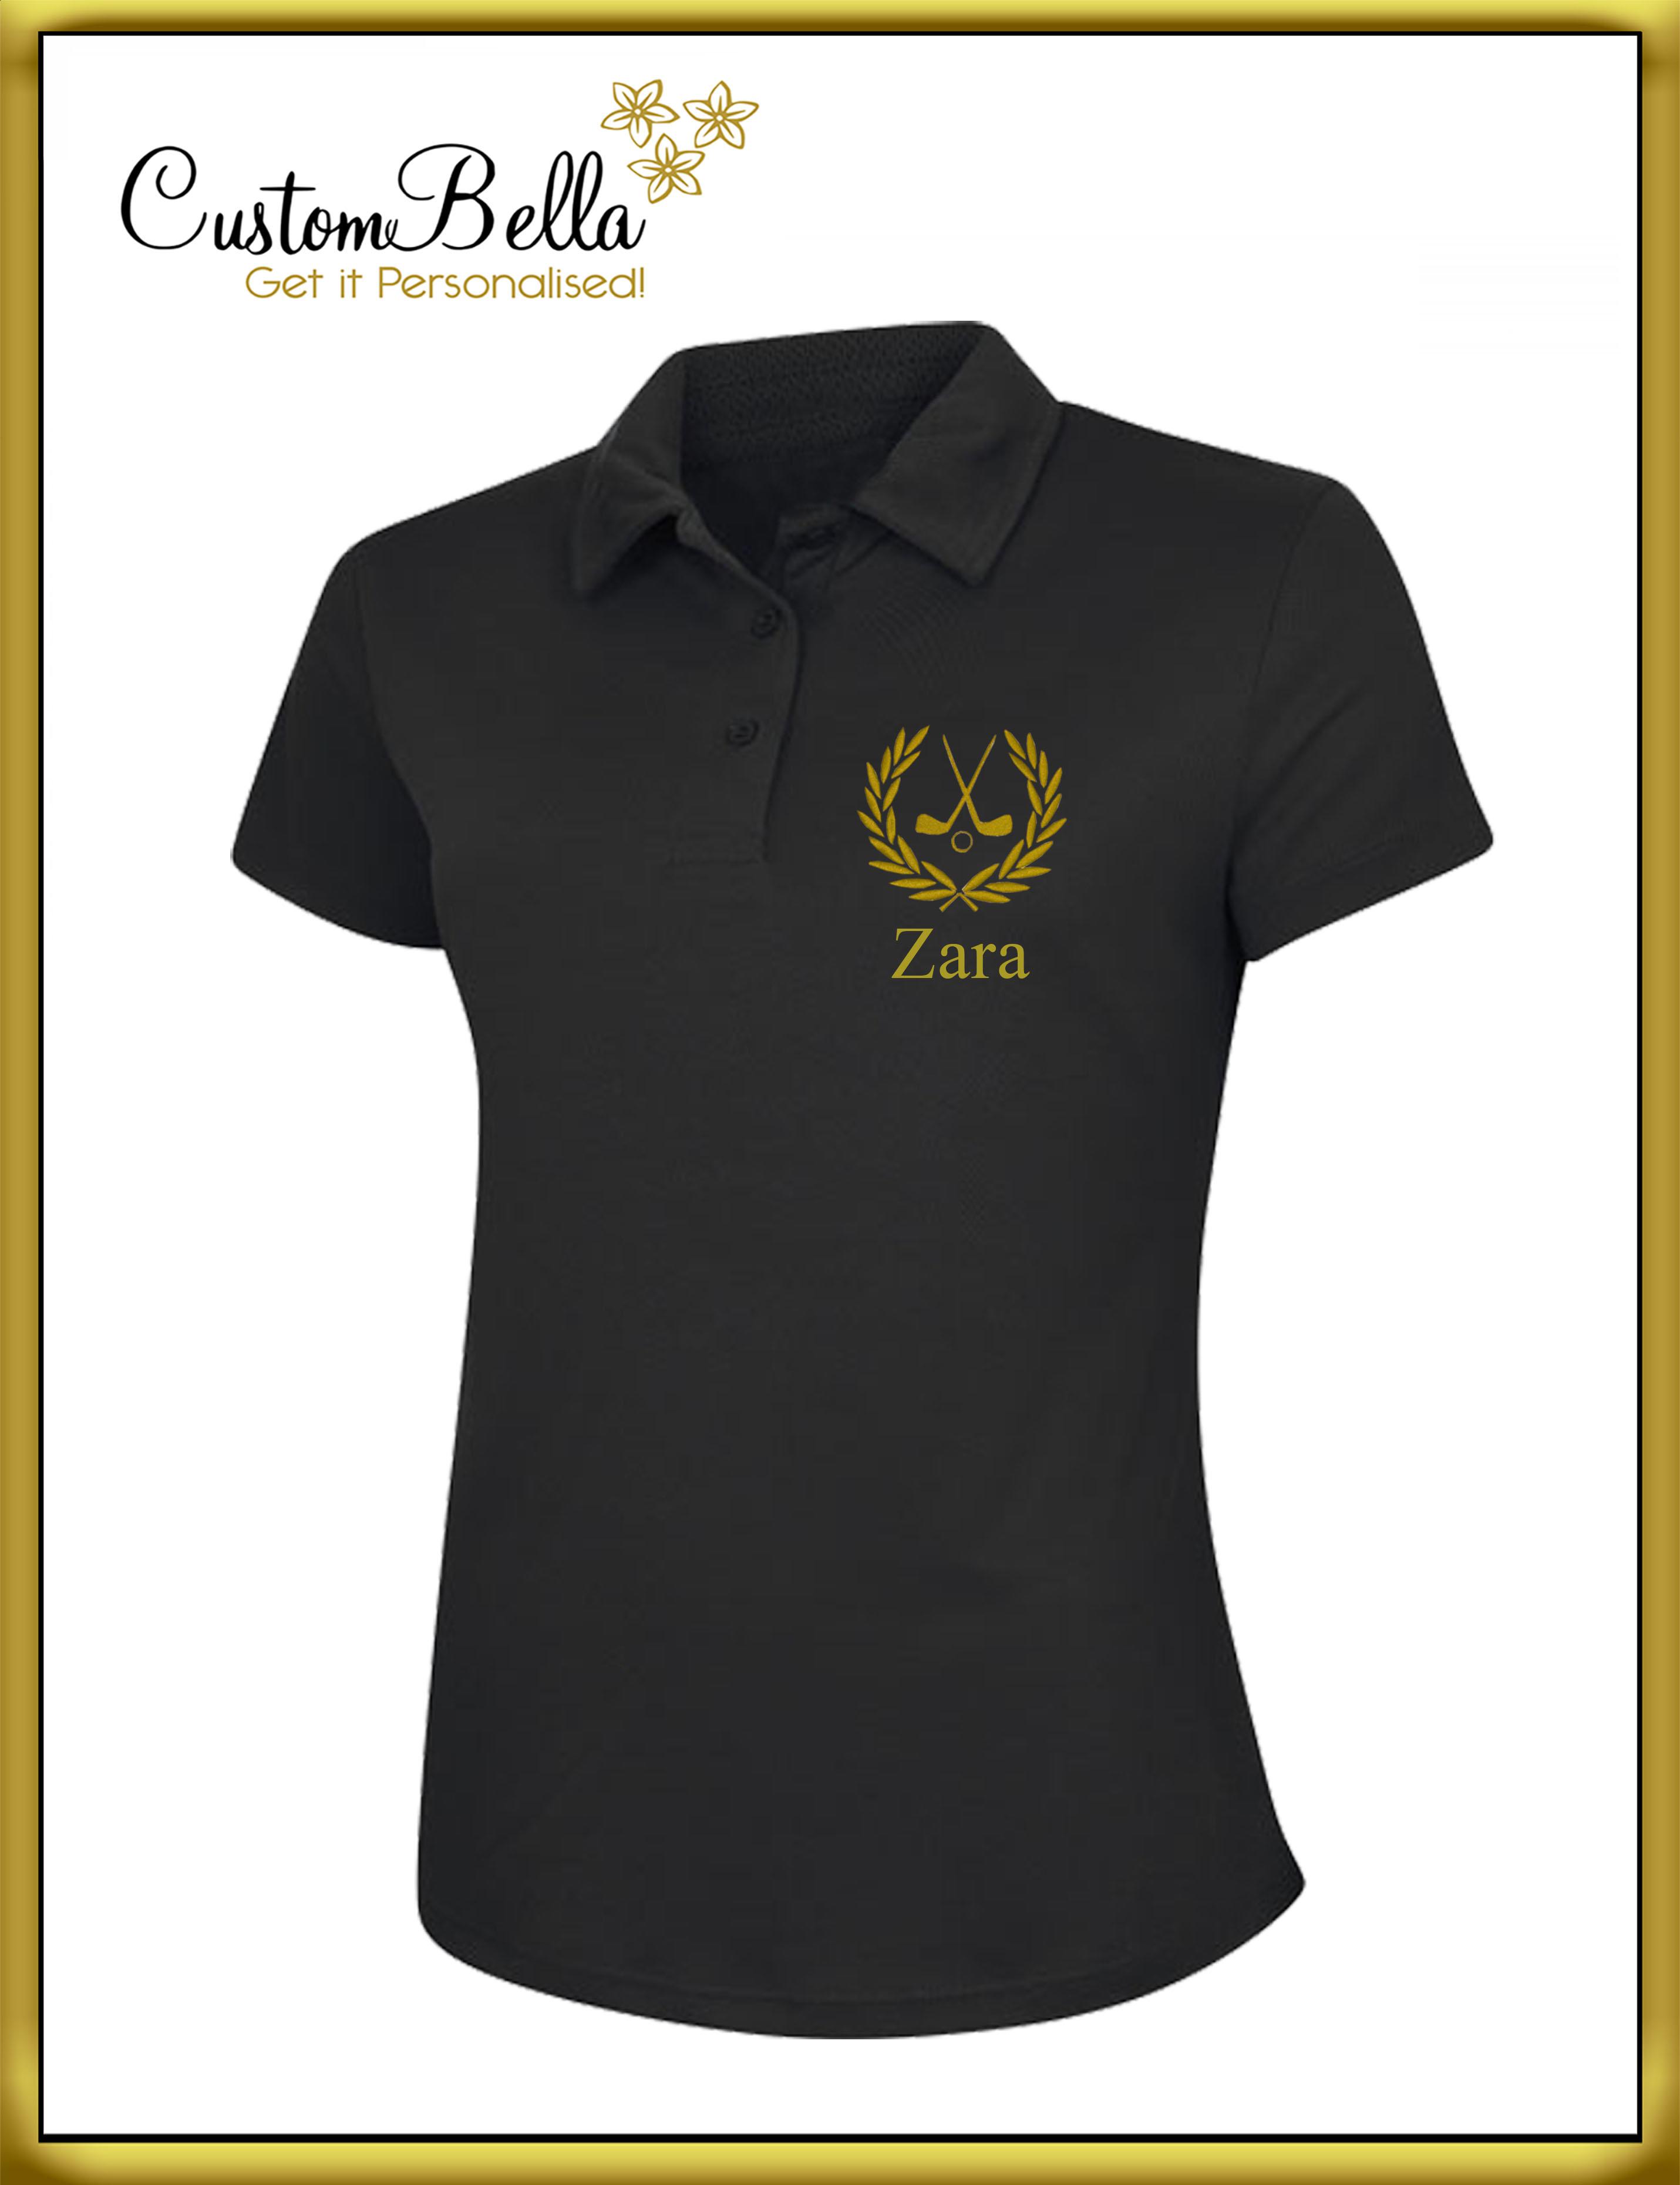 Embroidered Women's Dri Fit Polo Shirt black